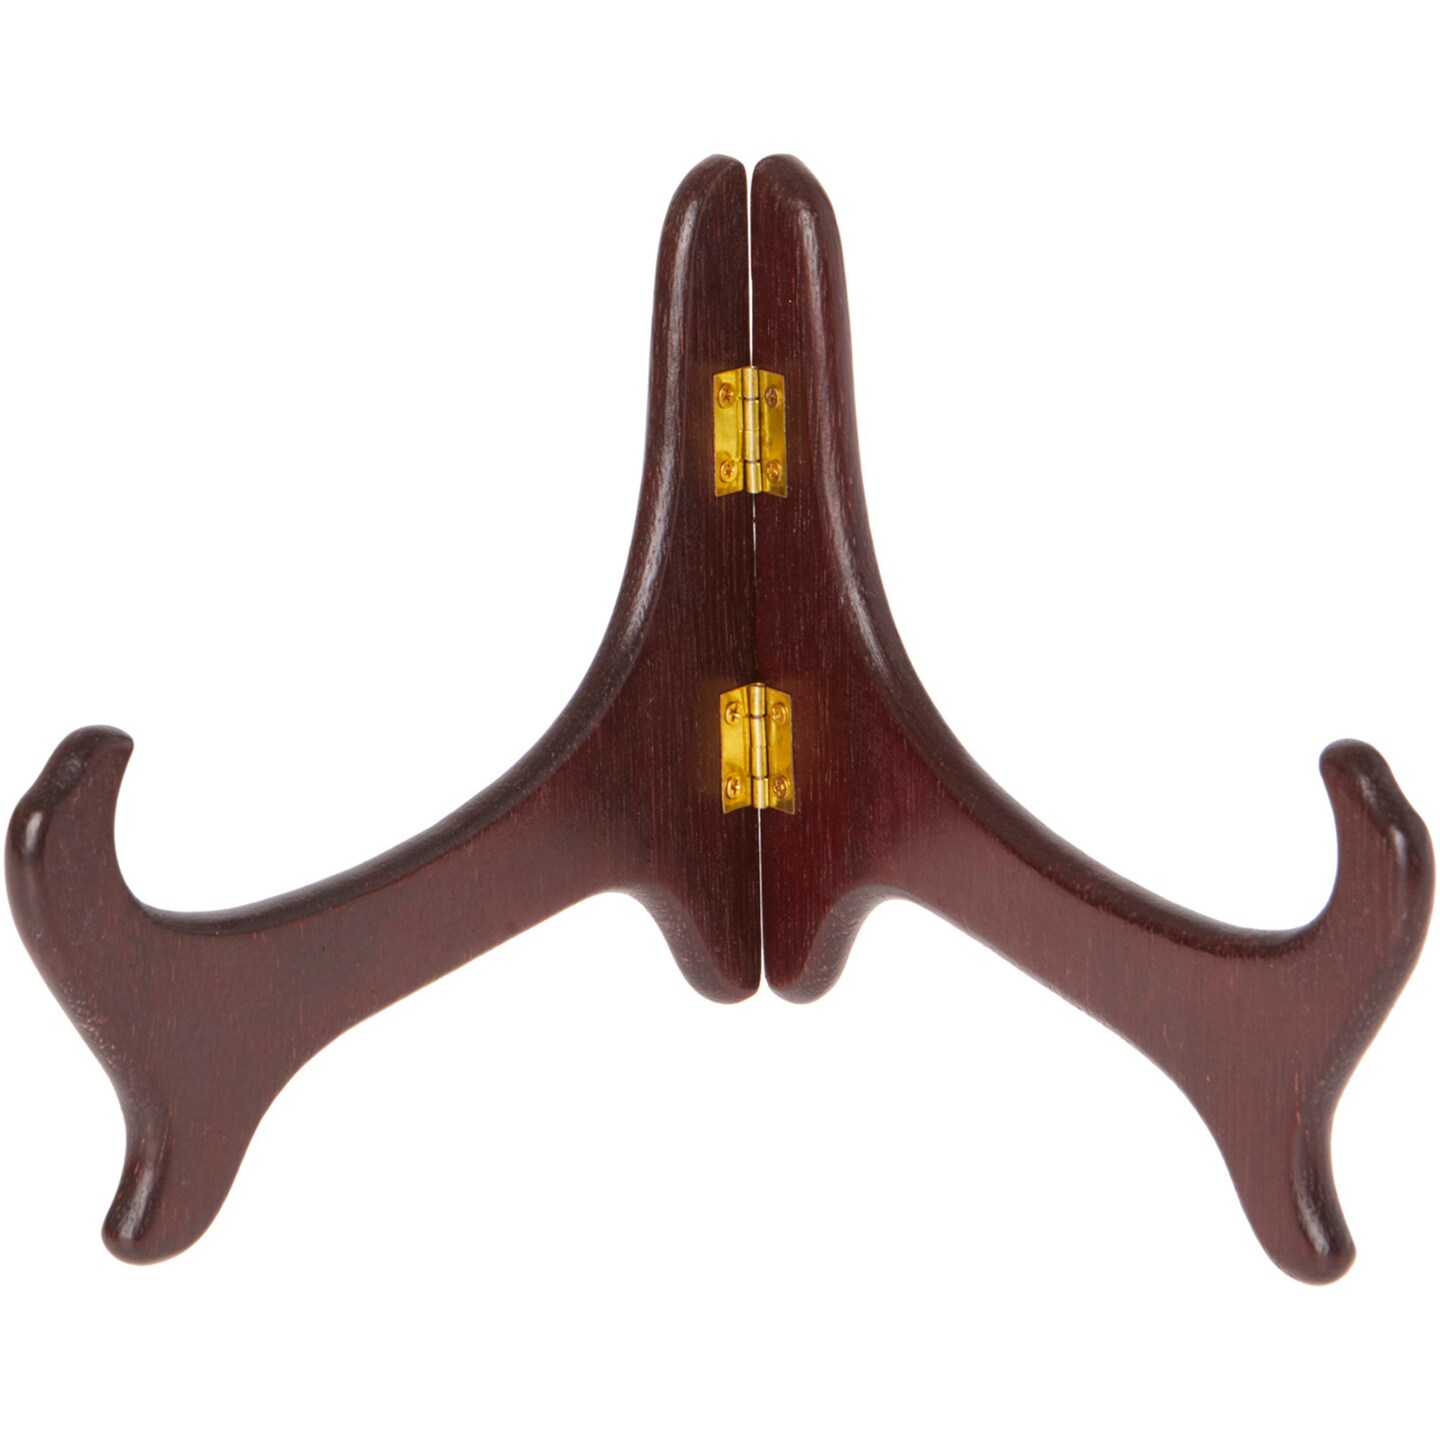 Bard&#x27;s Hinged Medium Wood Bowl Stand, 5.5&#x22; H x 9.25&#x22; W x 6.5&#x22; D (For Bowls up to 12&#x22; in diameter)